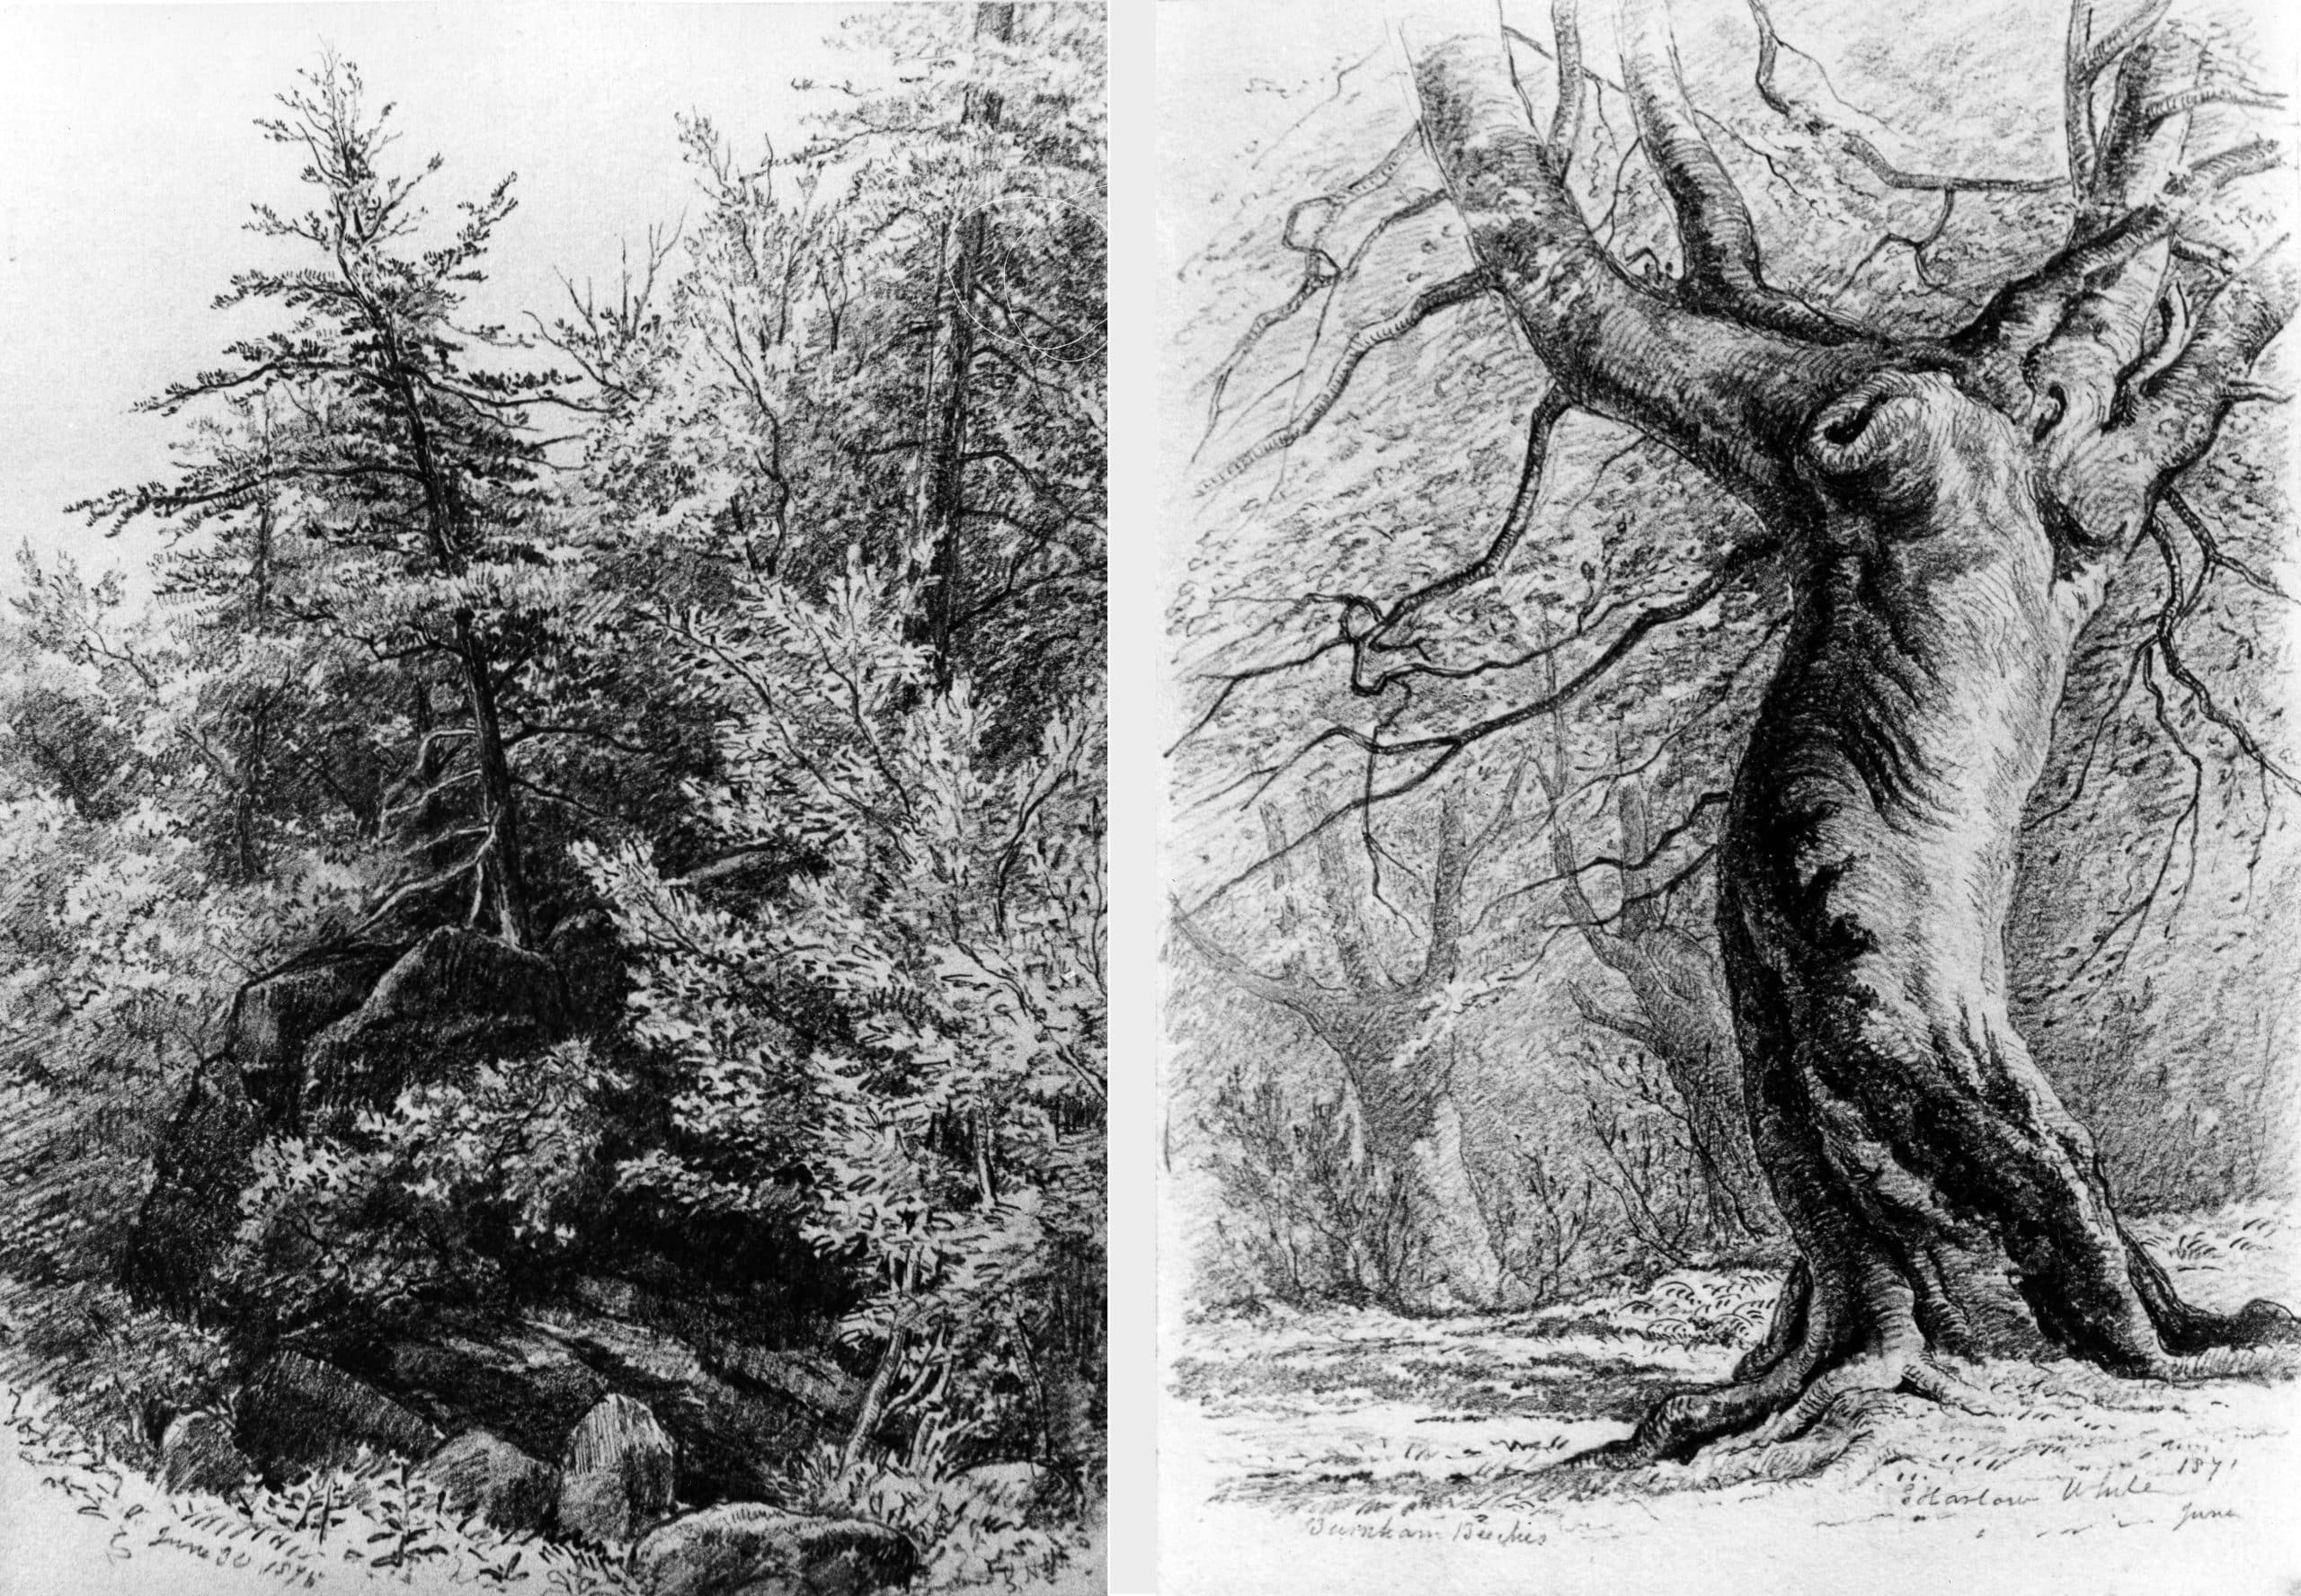 left: George Harlow White, Quebec, 1876, pencil on paper. Gift from the estate of Mrs. R. F. Segsworth, through the Queen’s University Art Foundation, 1944 (11-051.21) right: George Harlow White, Burnham Beeches, 1871, pencil on paper. Gift from the estate of Mrs. R. F. Segsworth, through the Queen’s University Art Foundation, 1944 (11-050.05)